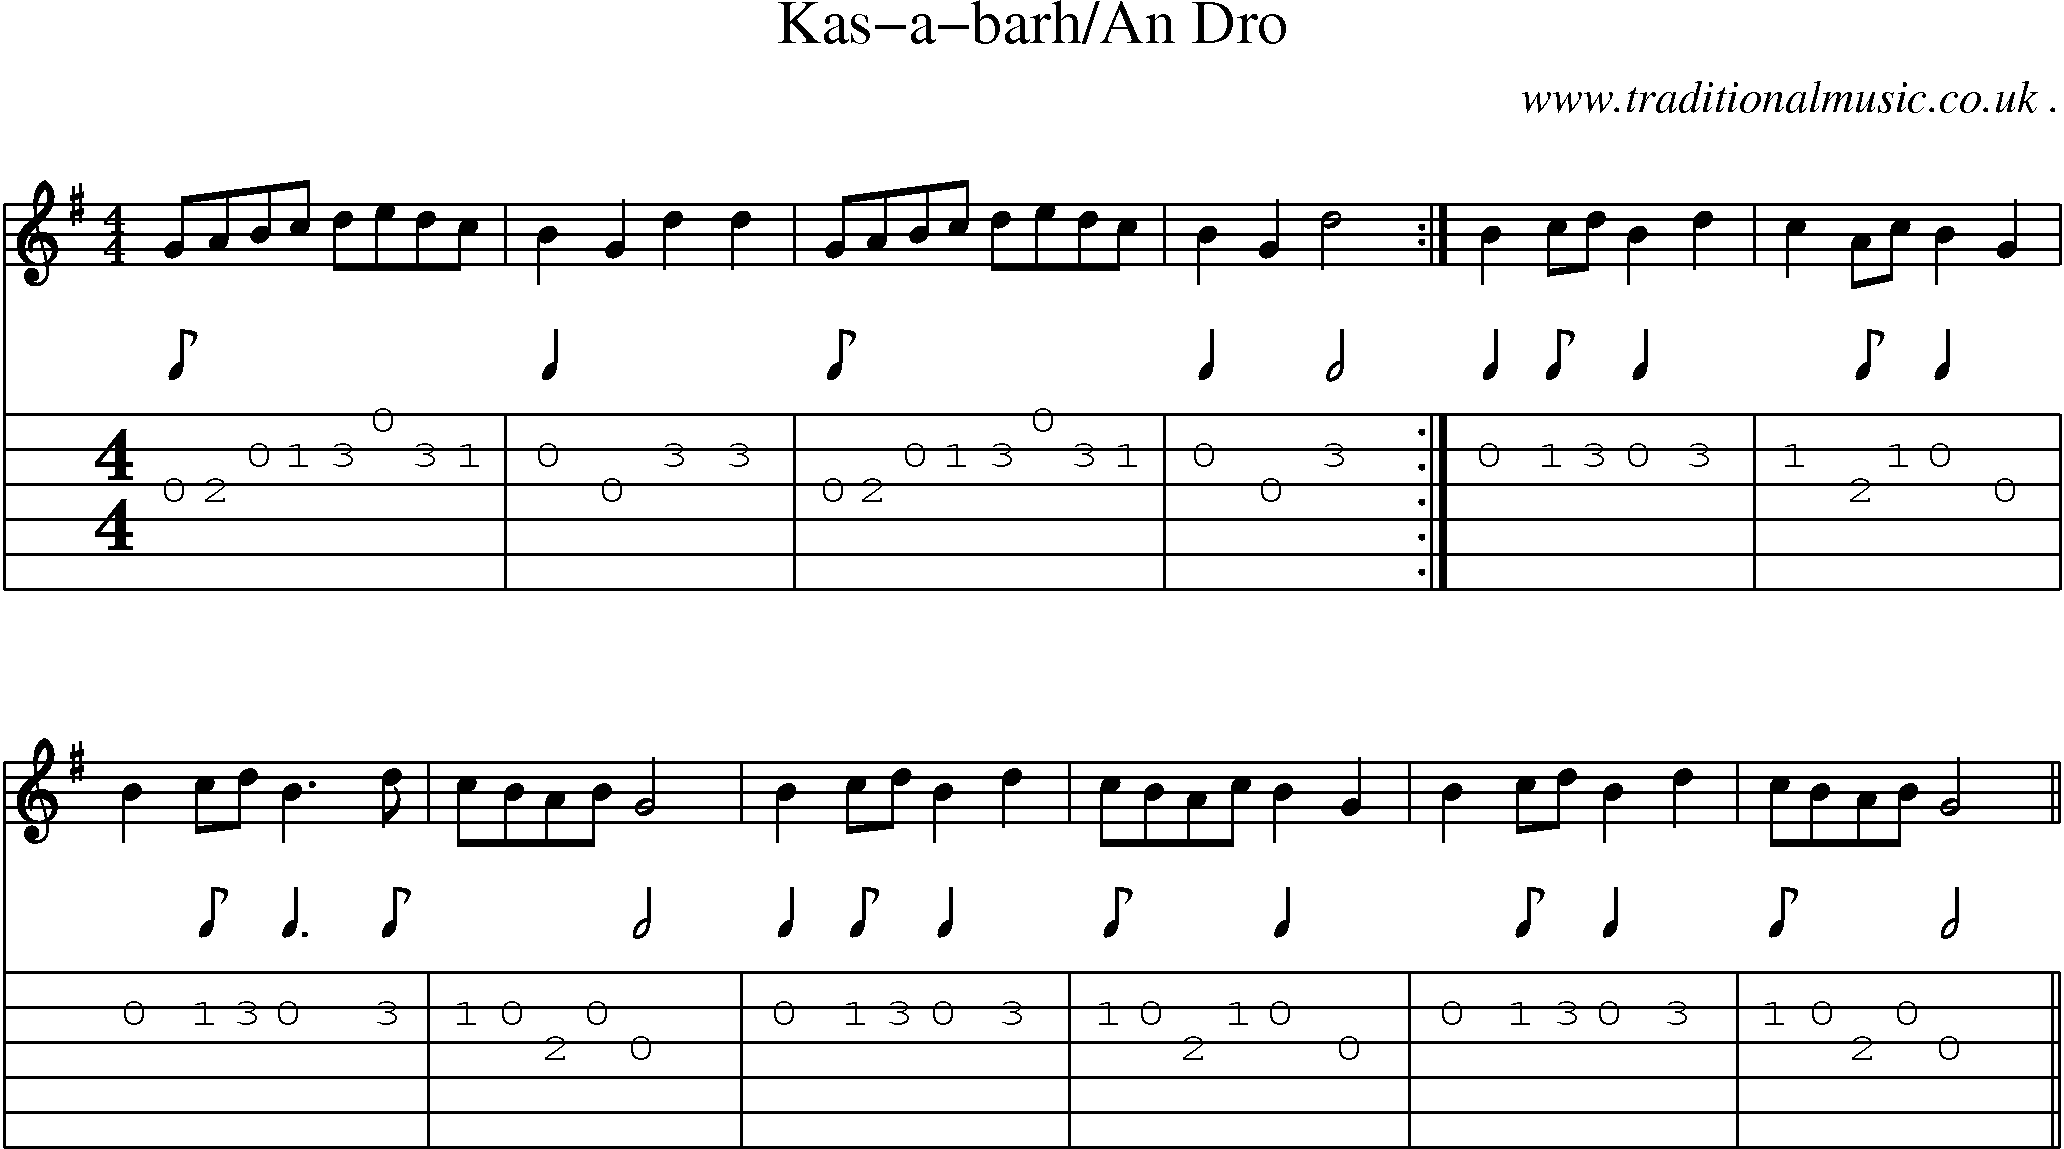 Sheet-Music and Guitar Tabs for Kas-a-barhan Dro